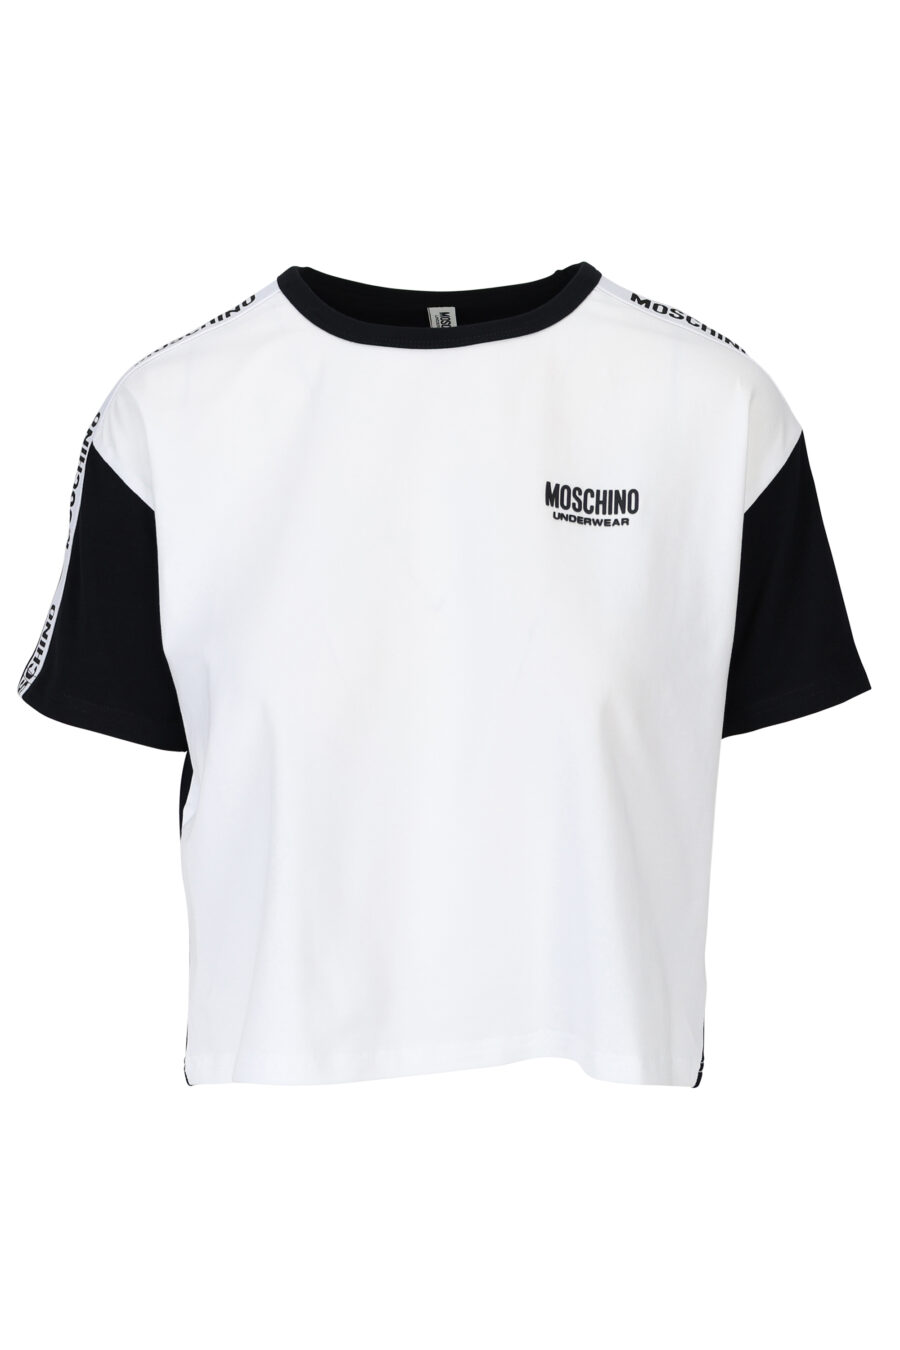 White T-shirt with black sleeves and back and ribbon logo - 667113062037